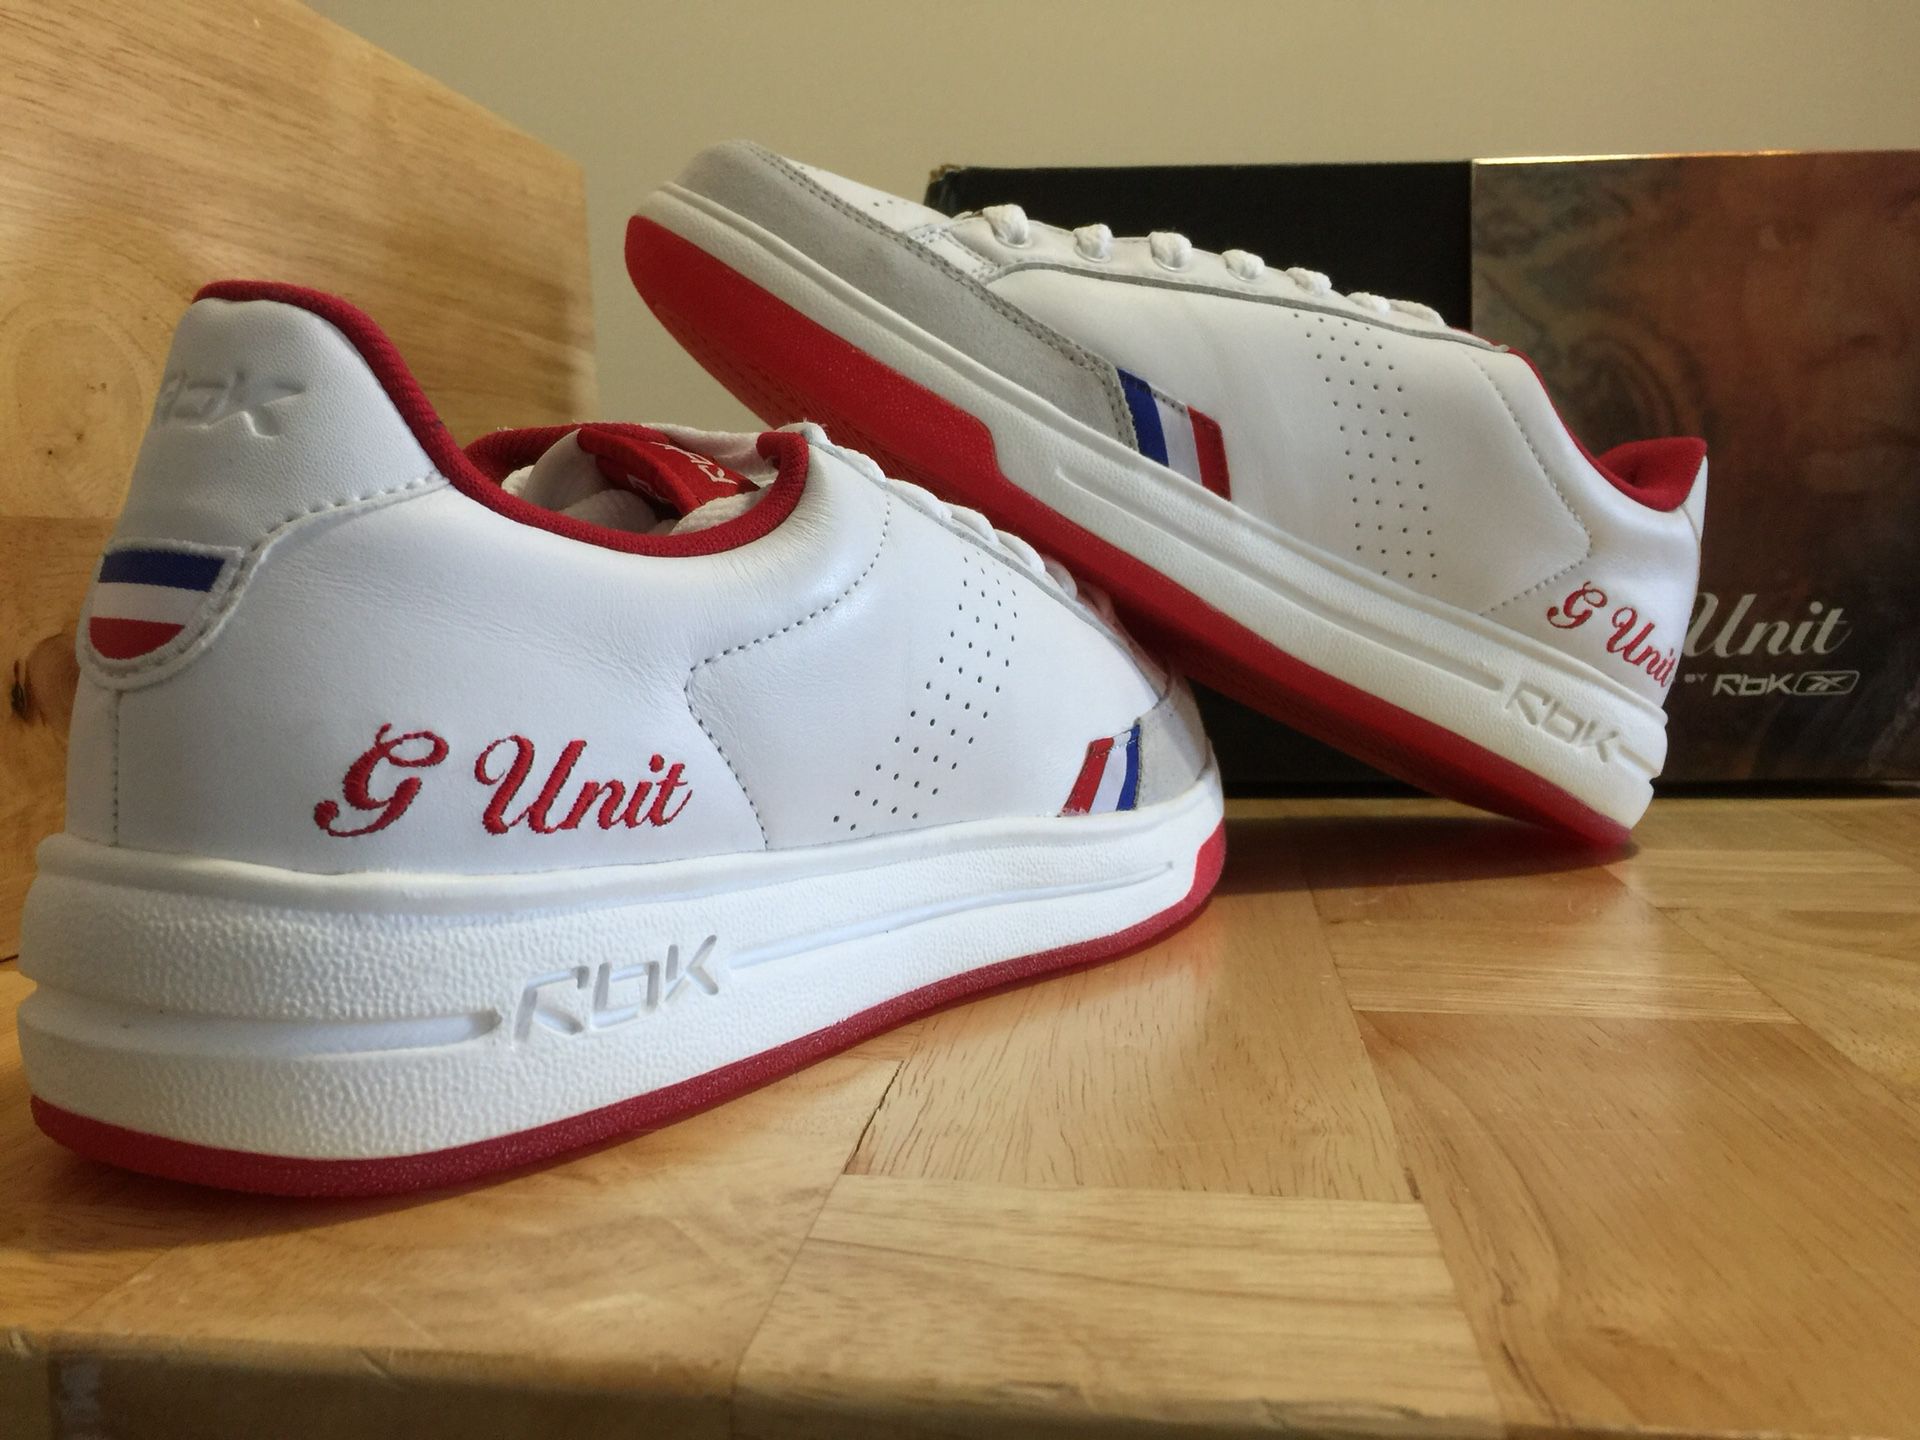 Reebok 2003 G6 G-Unit 50 cent. Brand new for Sale in New Britain, CT -  OfferUp